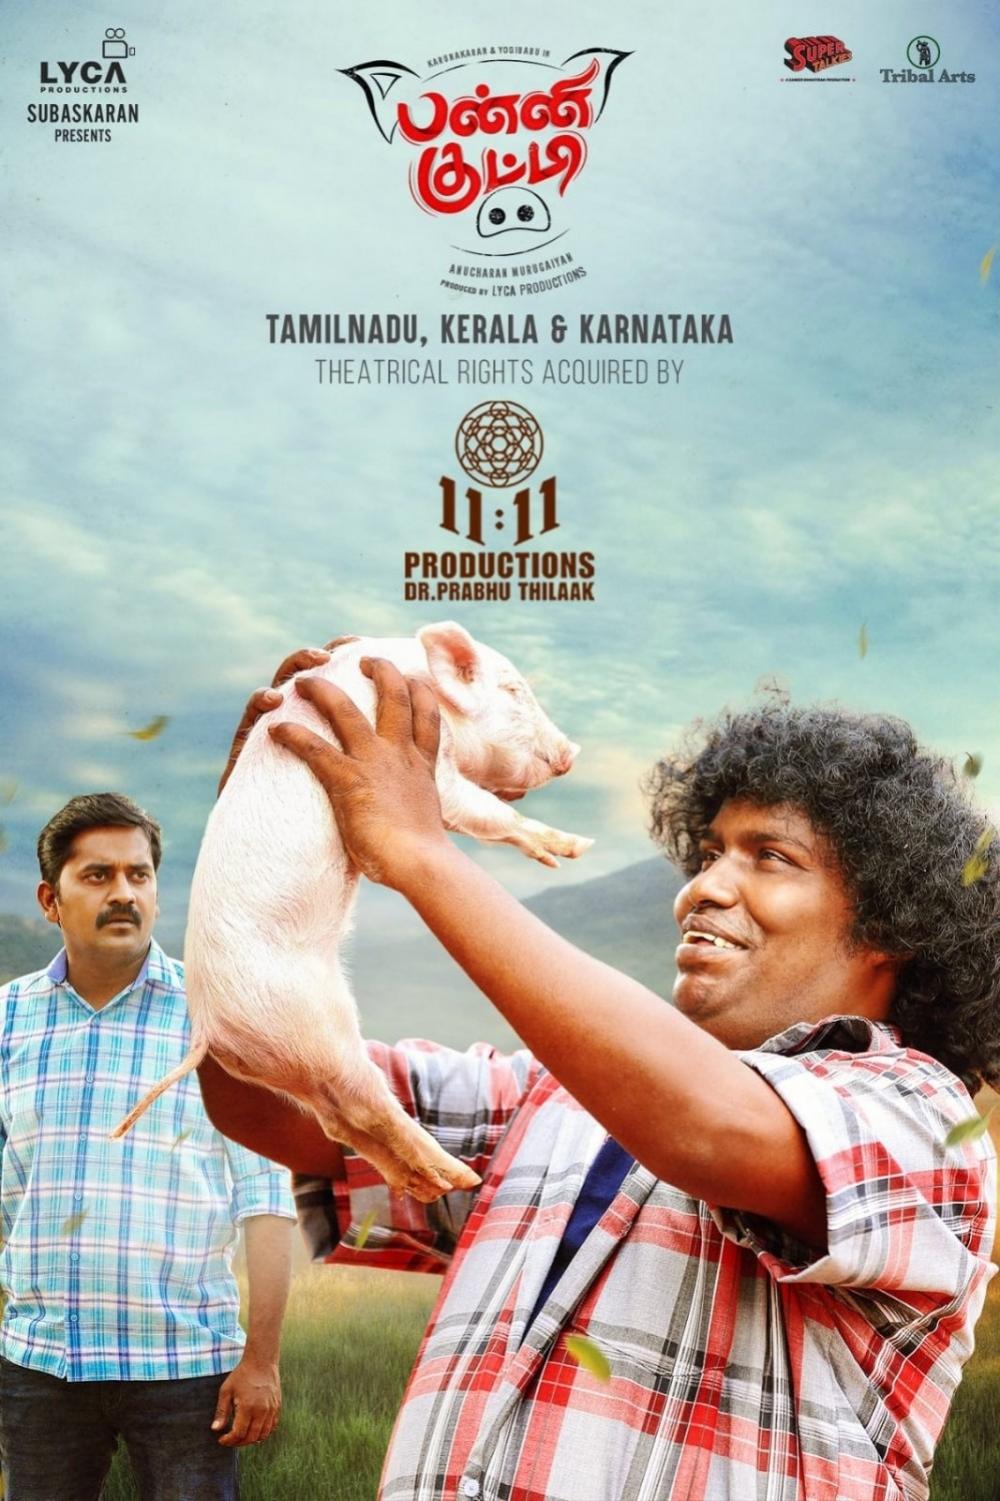 The Weekend Leader - TN, K'taka, Kerala theatrical rights of 'Panni Kutty' acquired by 11:11 Productions